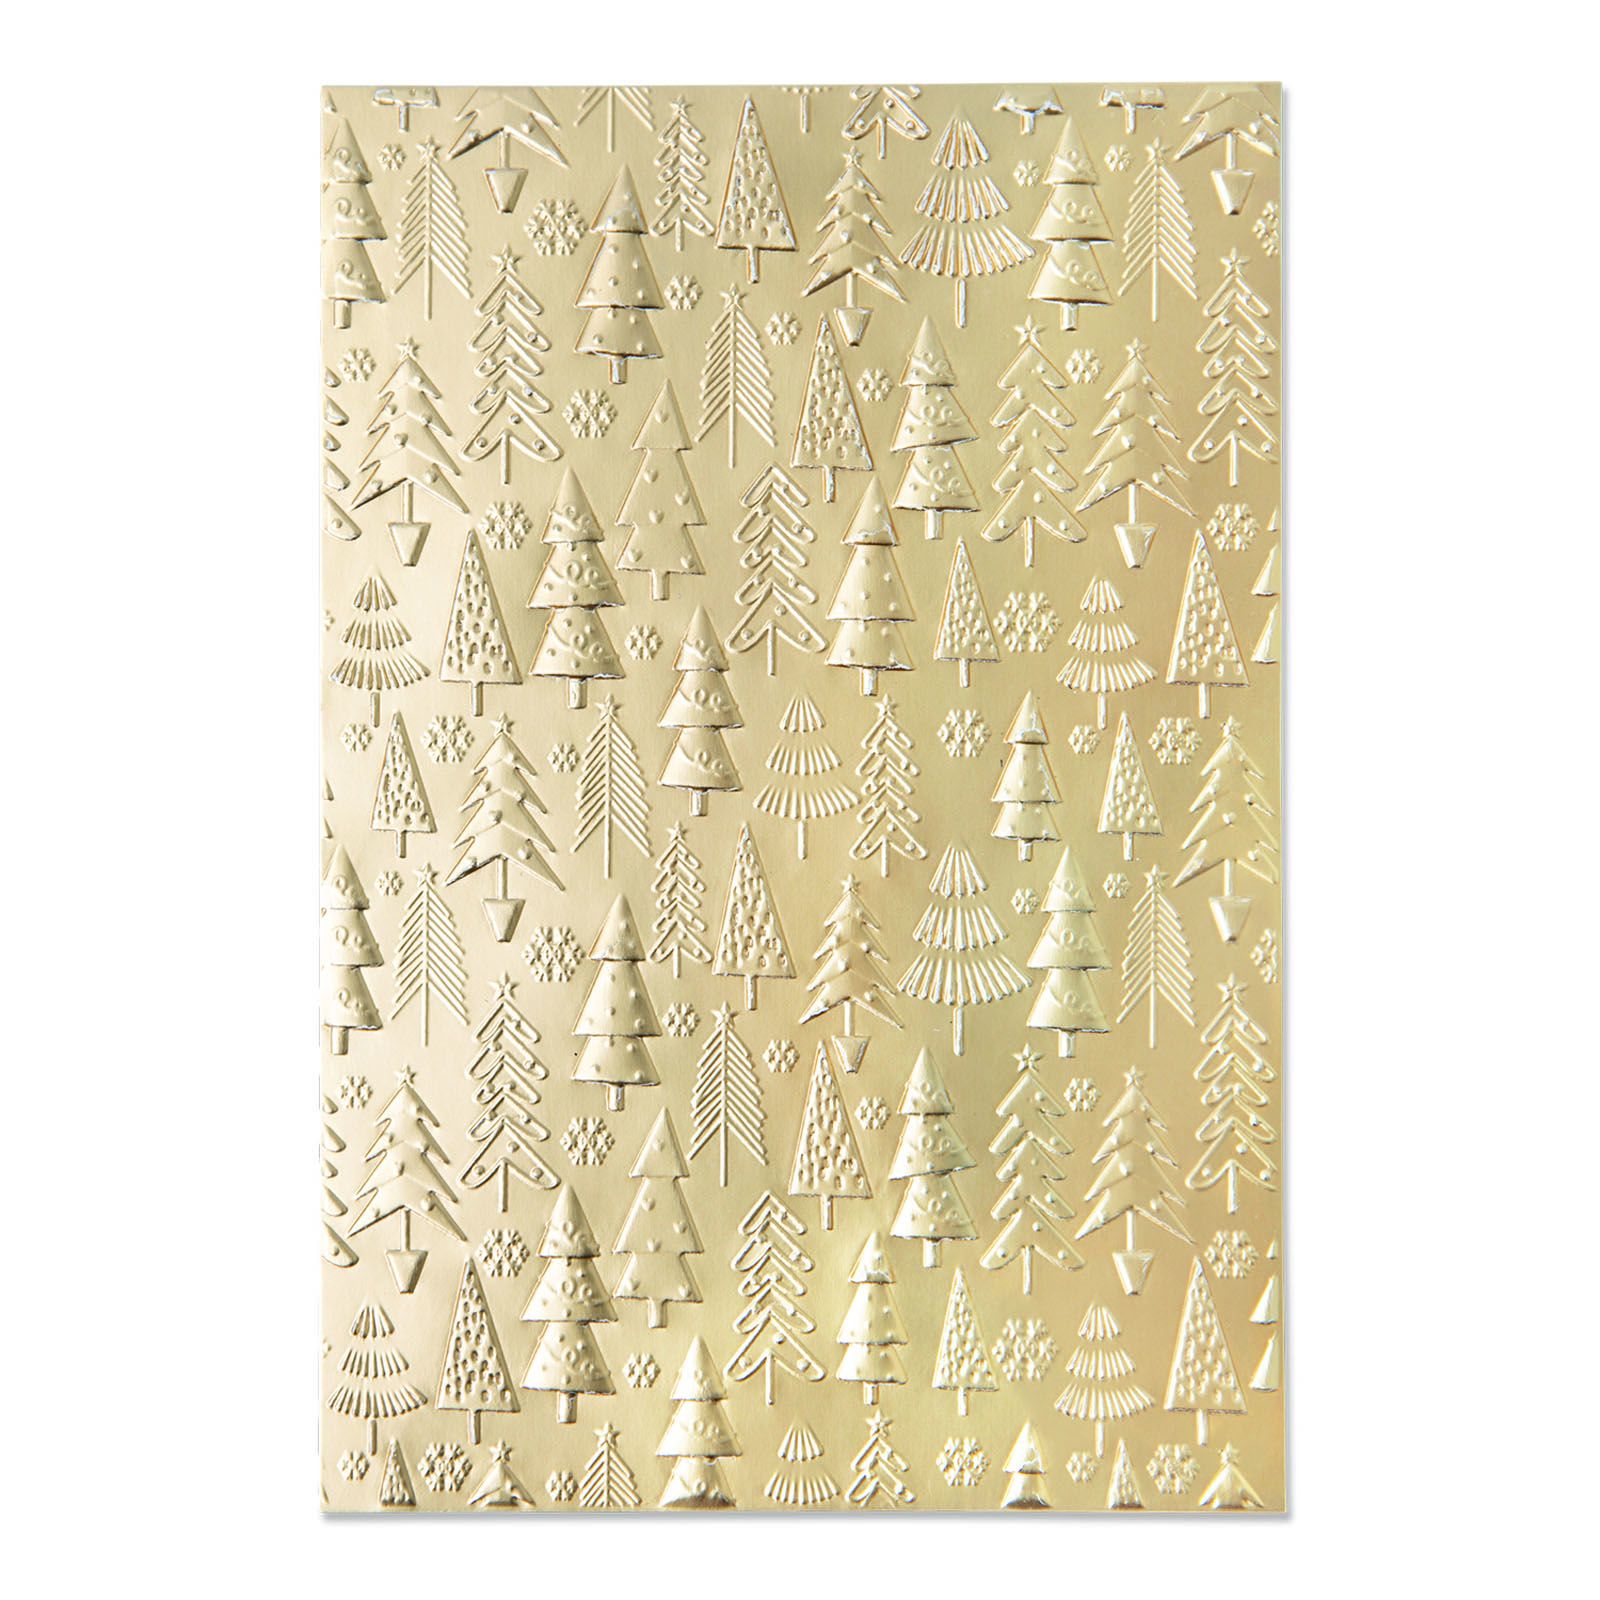 Sizzix • 3D textured impressions embossing folder Christmas tree pattern